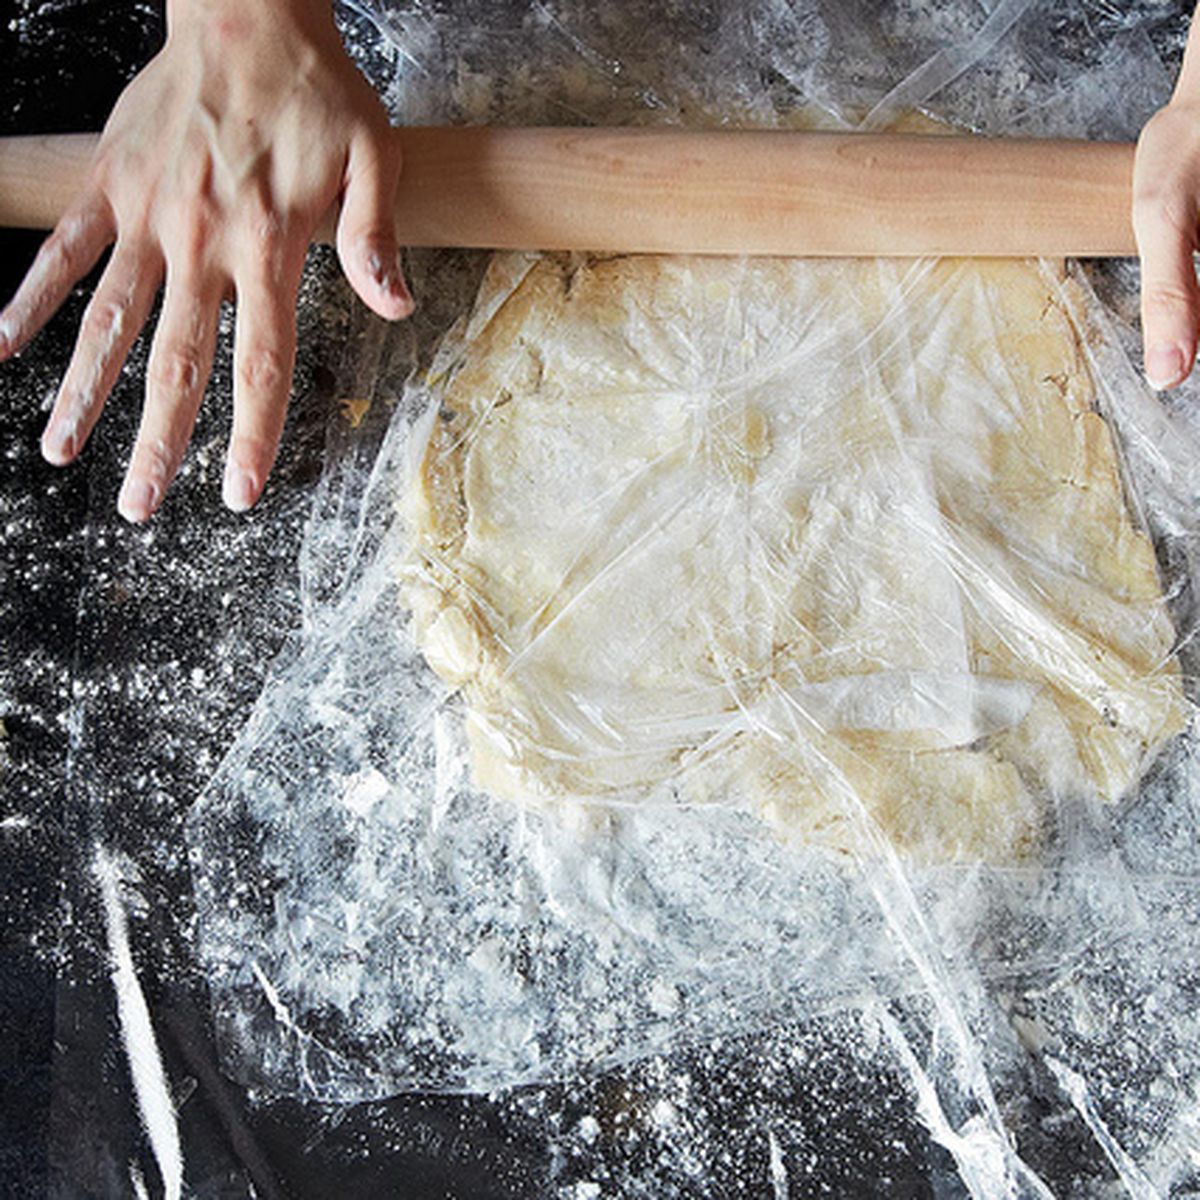 Wrap the Dough in Plastic and. Roll out the Dough. Women fermented Dough.